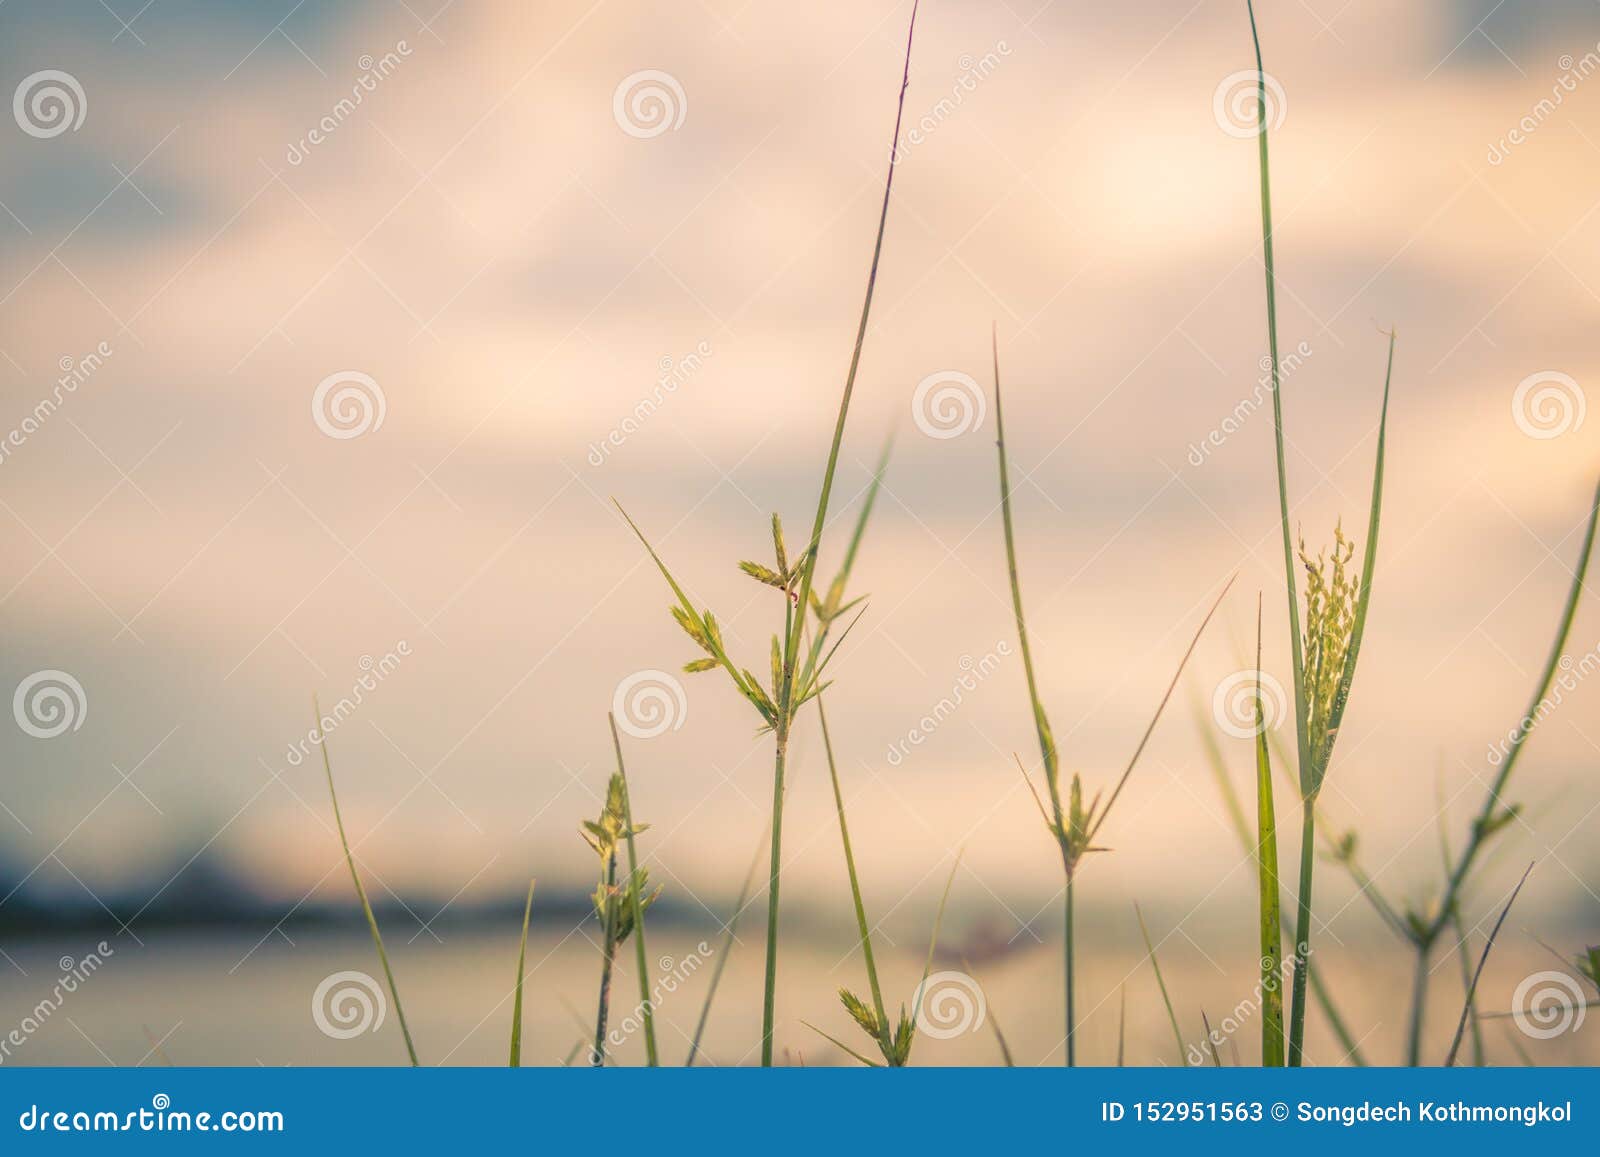 Vintage Style and Romantic Abstract Nature View of Grass Flower Stock